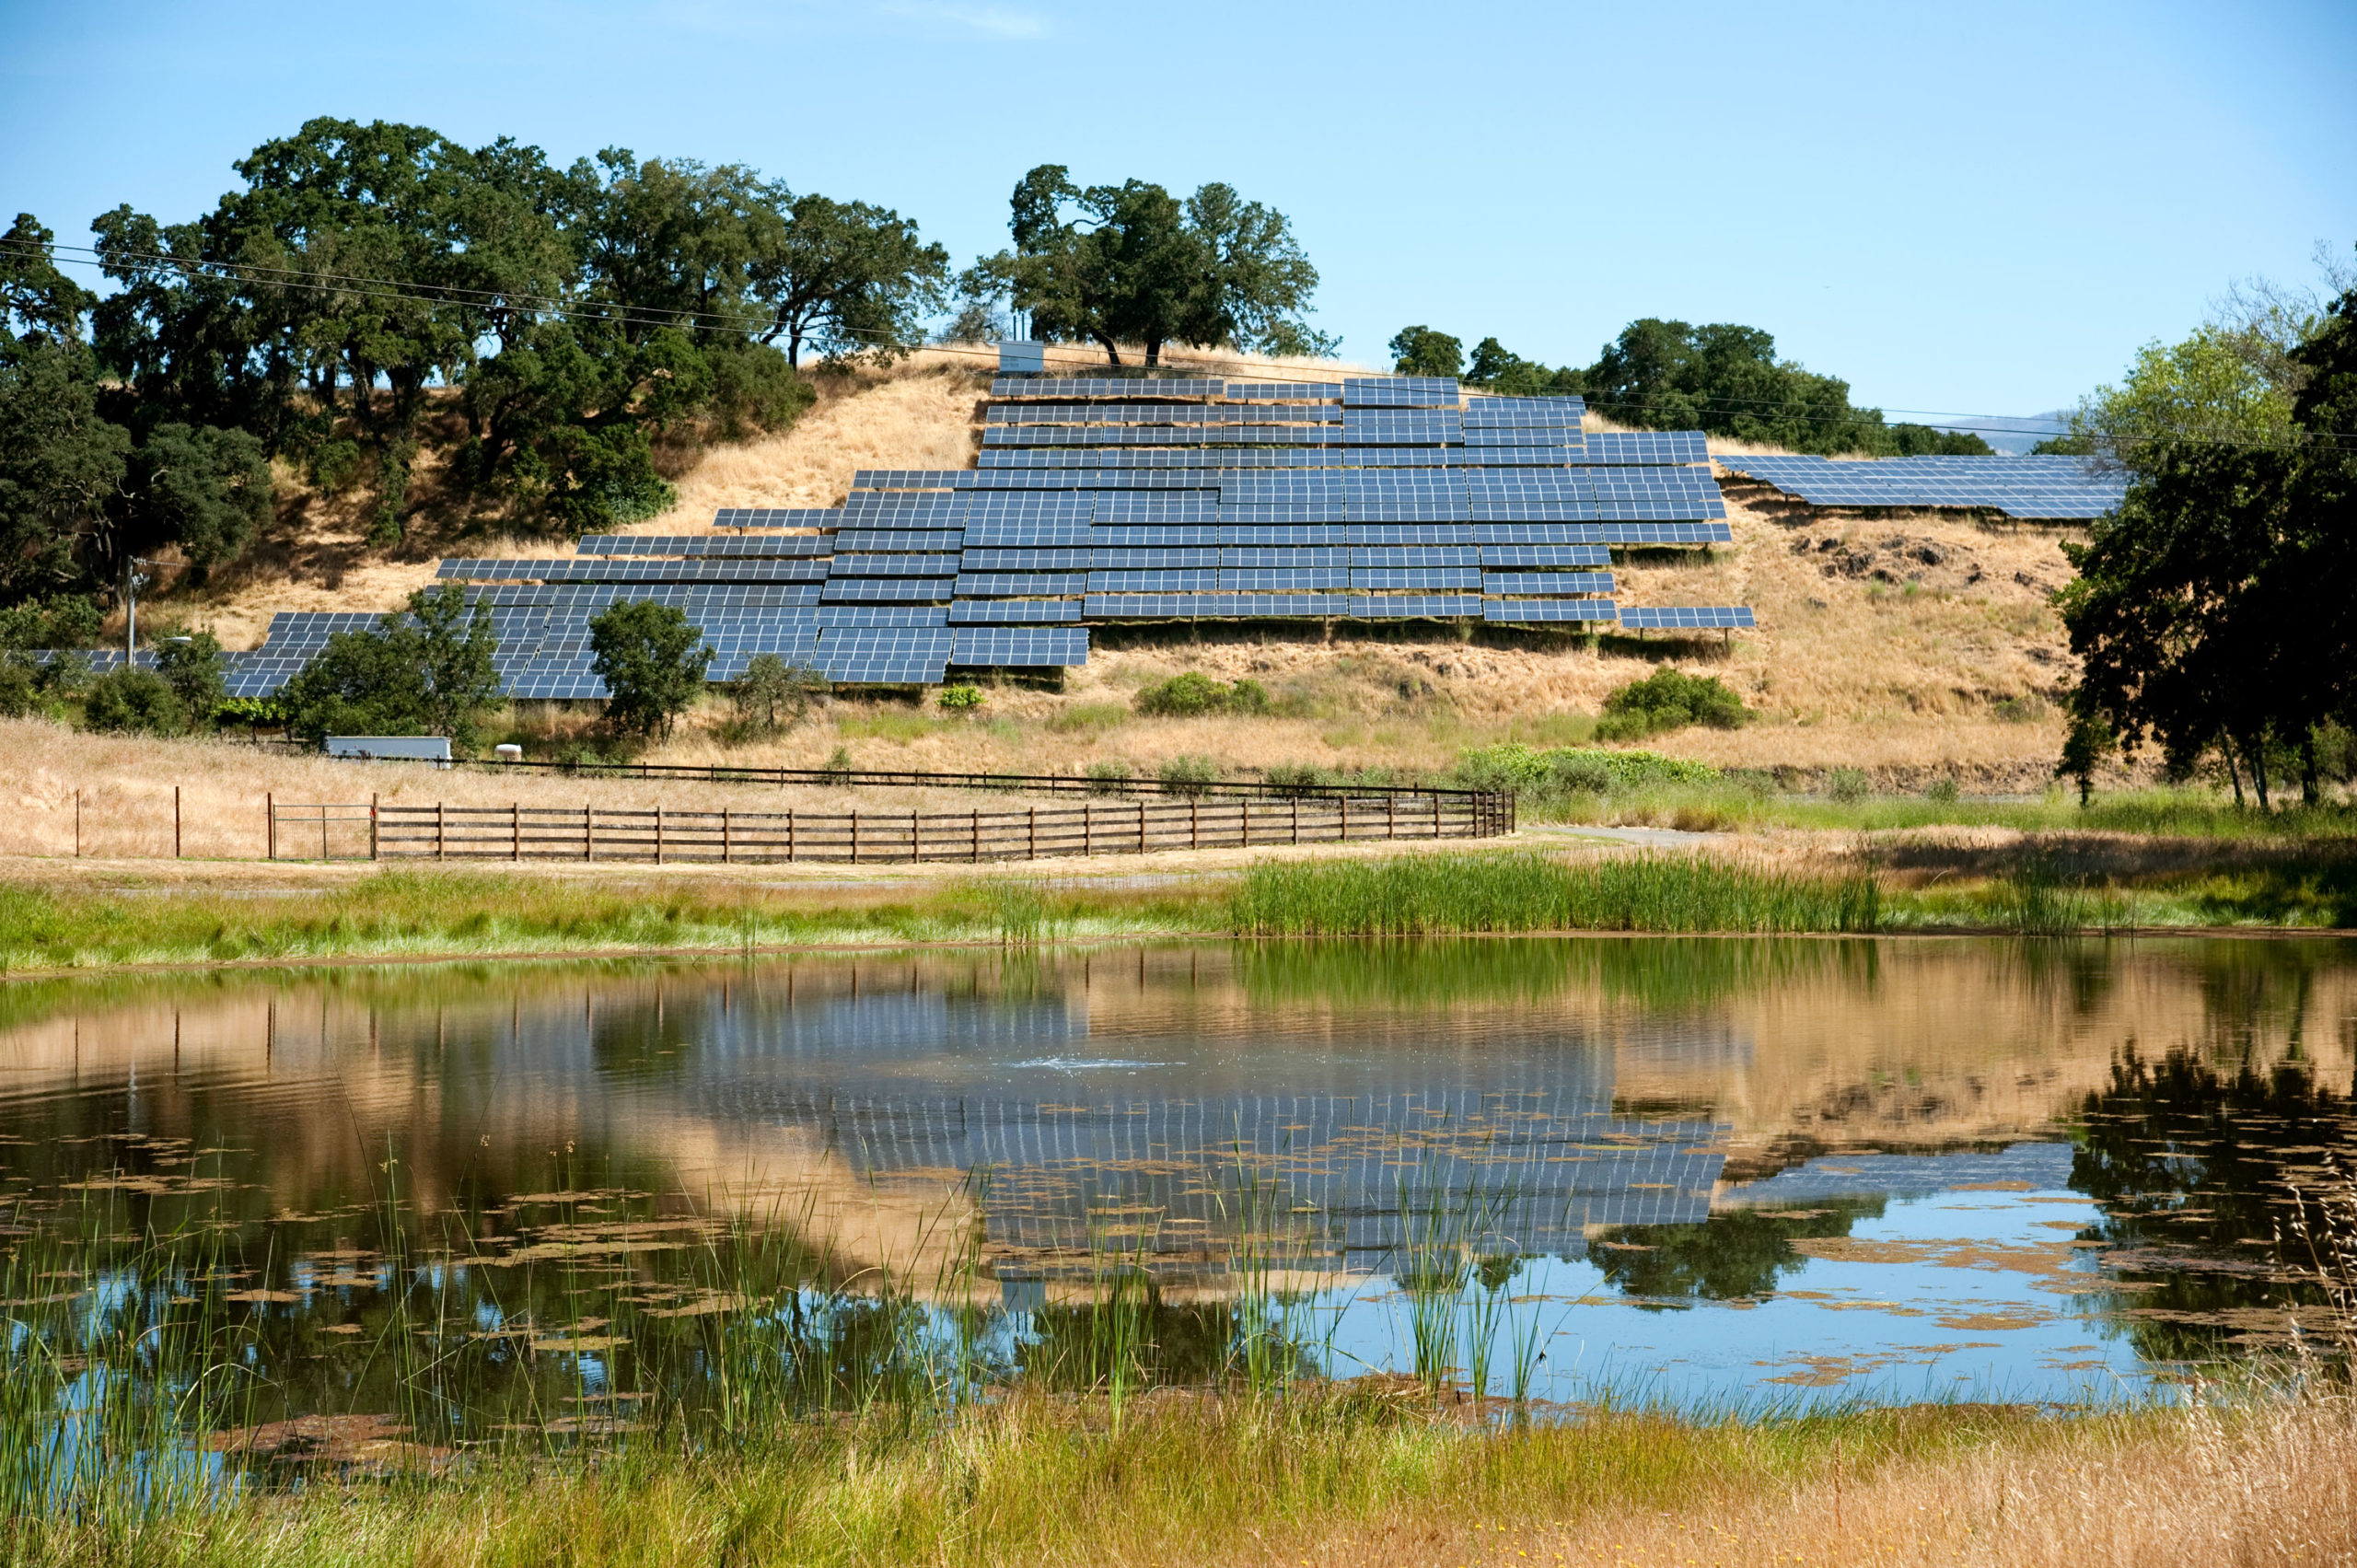 solar panels on grassy hillside with trees and lake